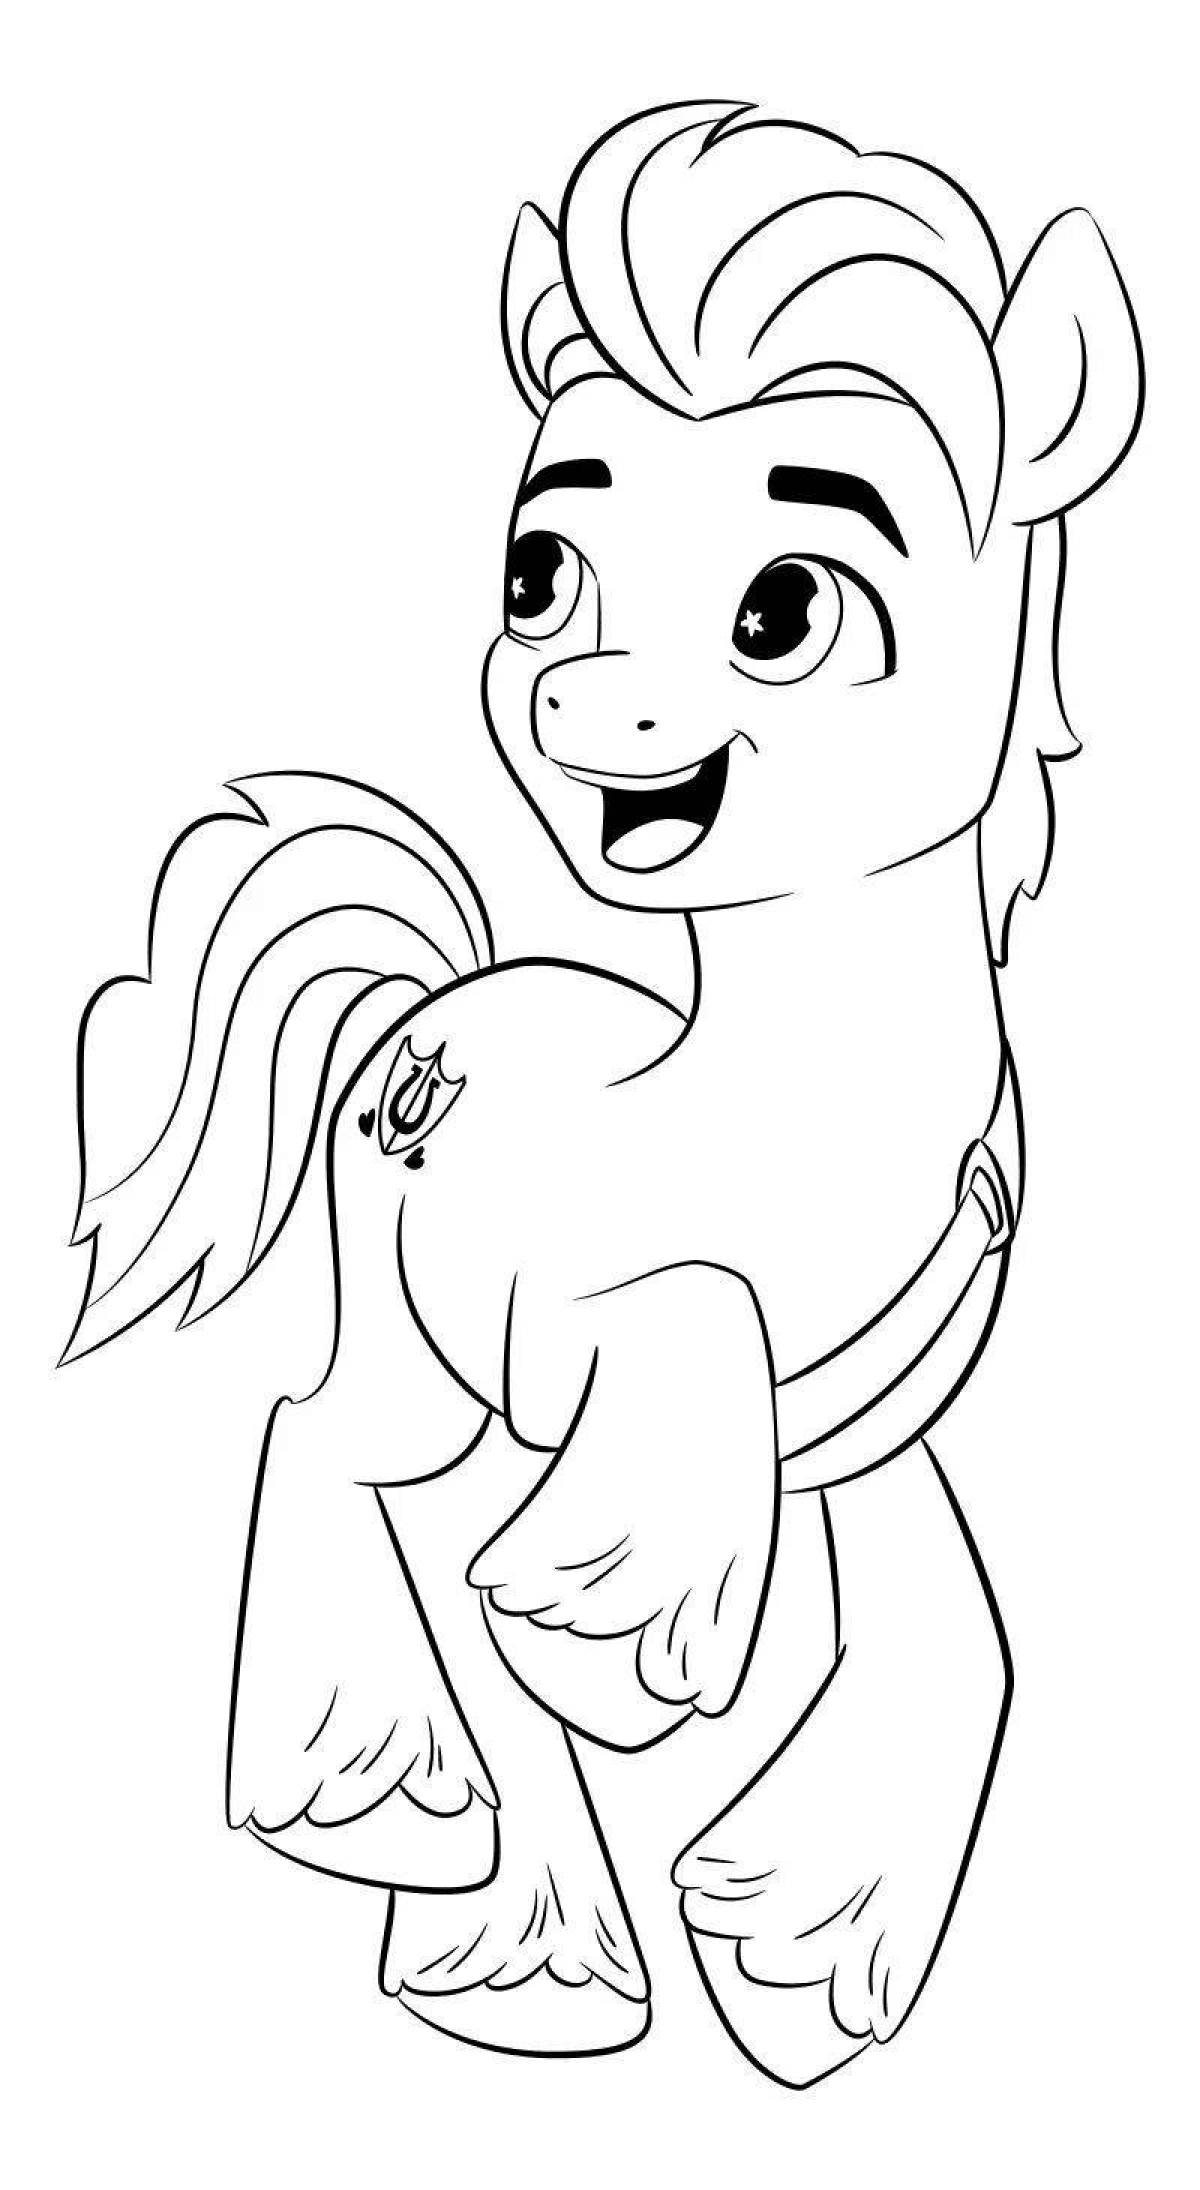 Little pony next generation amazing coloring book